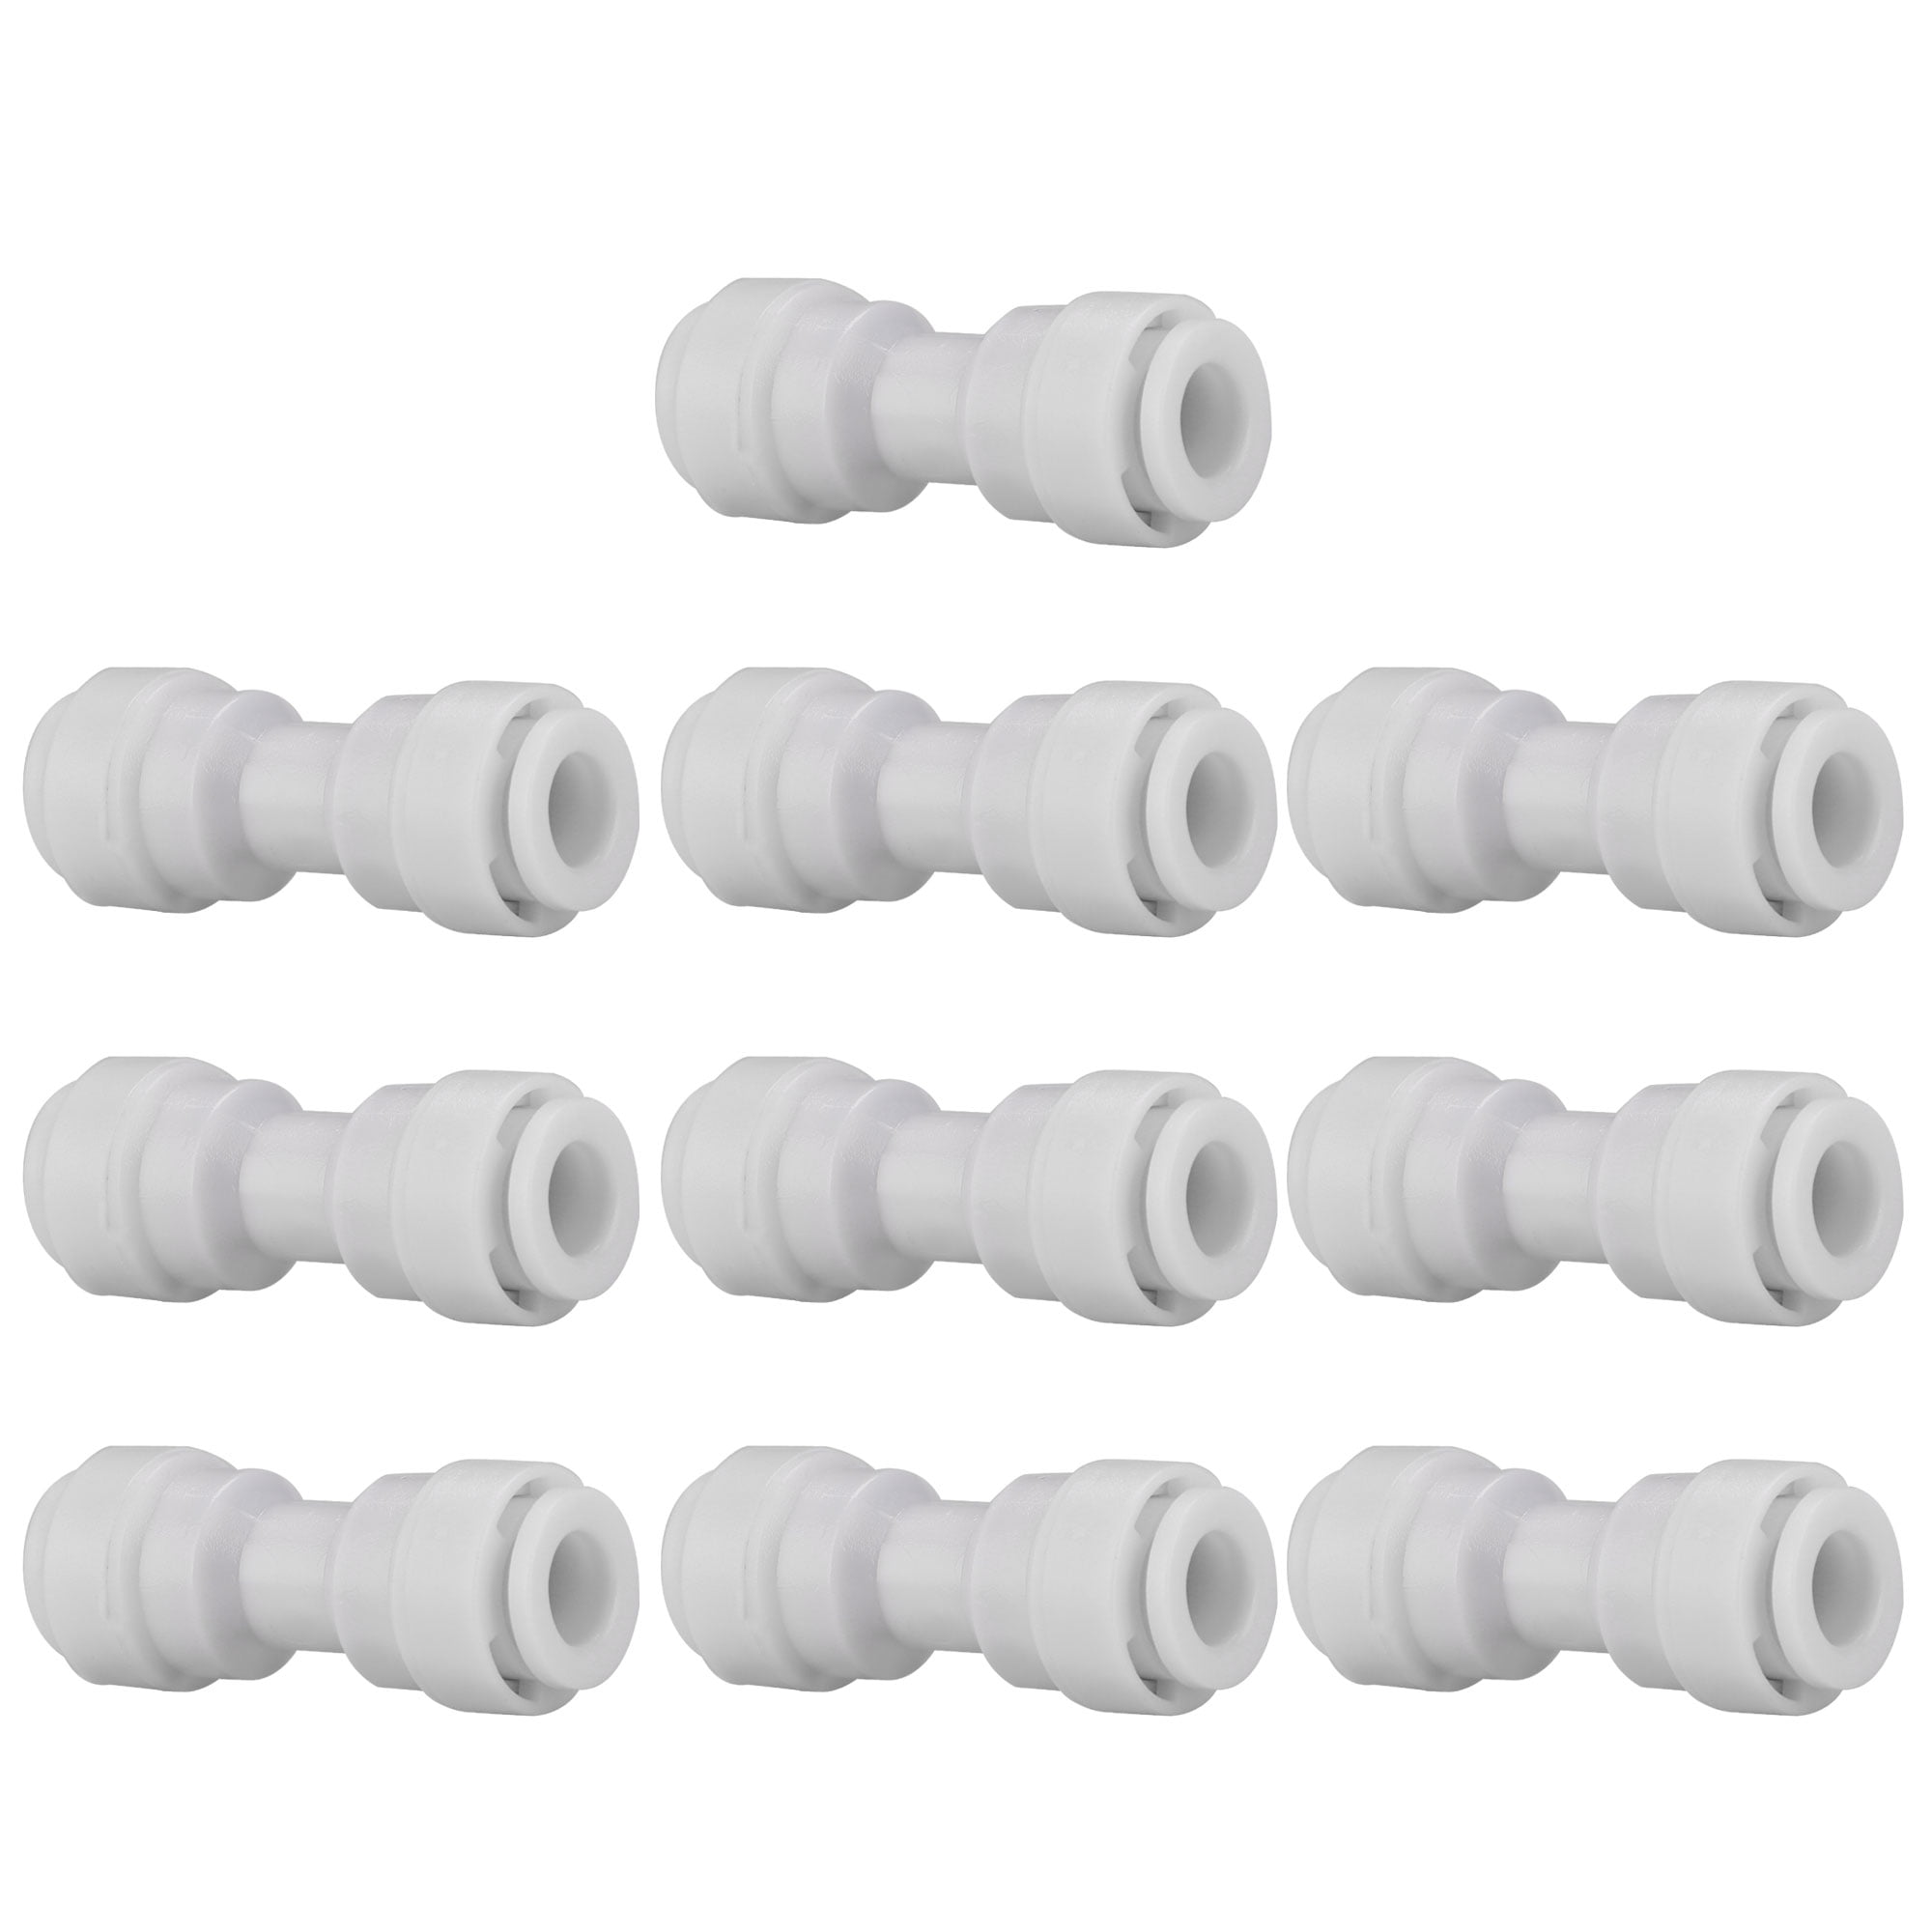 10pcs Straight Connector Adapter for Water Filter for 1/4" Pipe Tube Fridge 